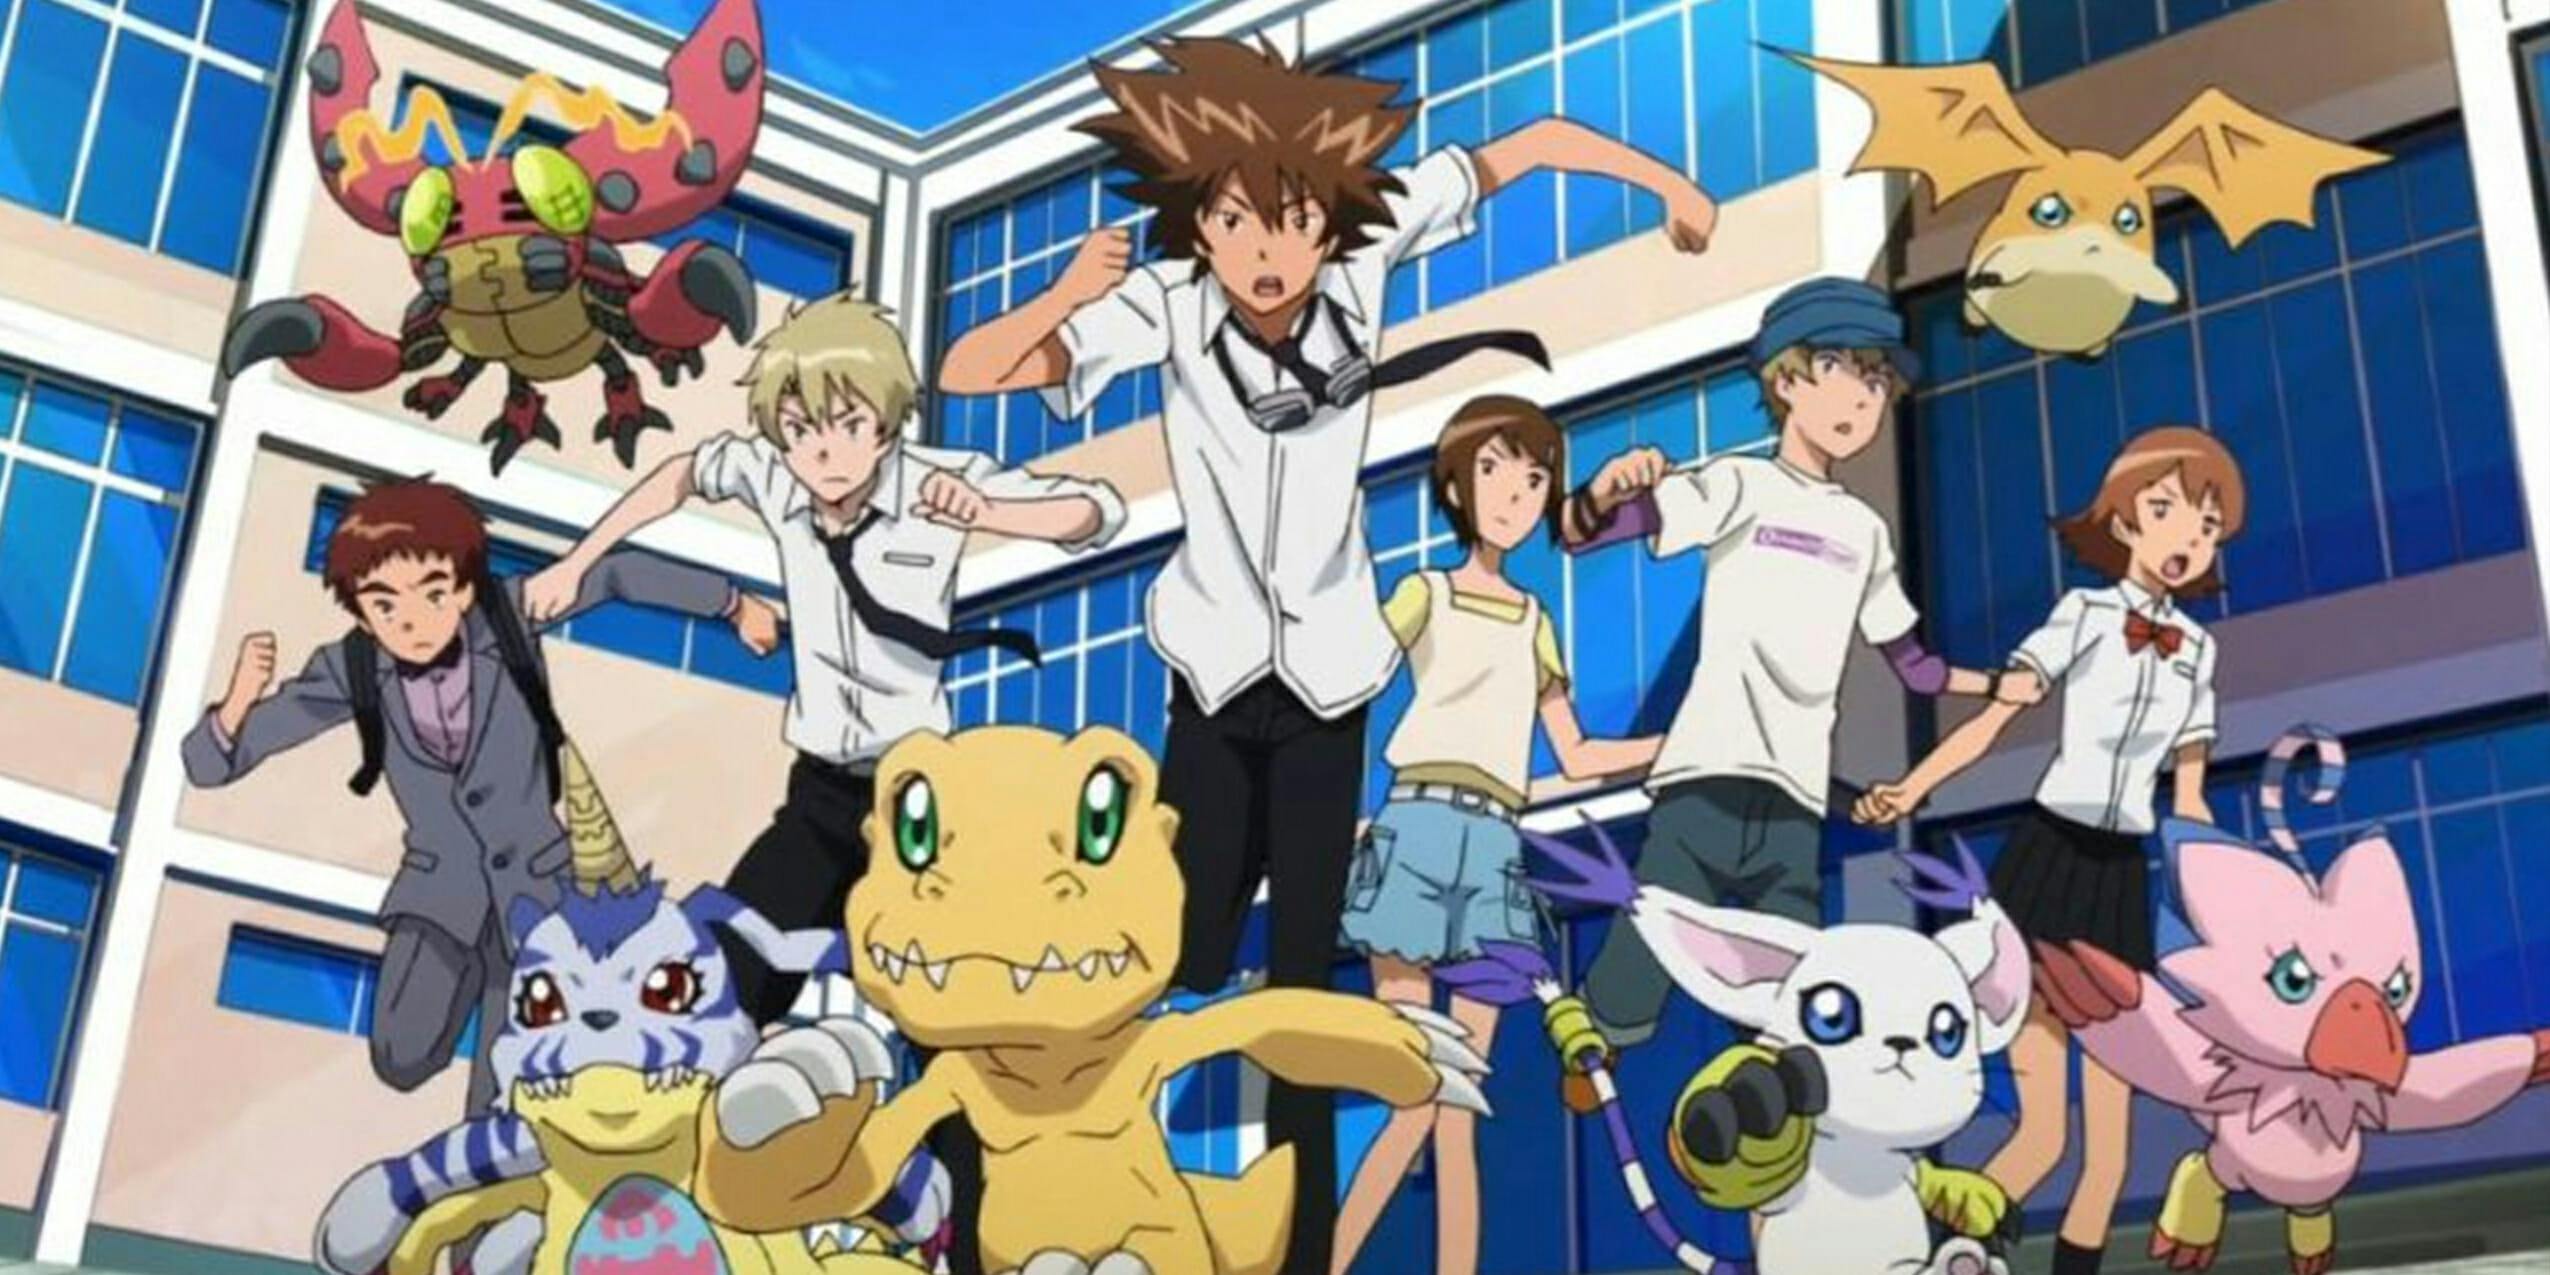 Where to watch Digimon Frontier TV series streaming online